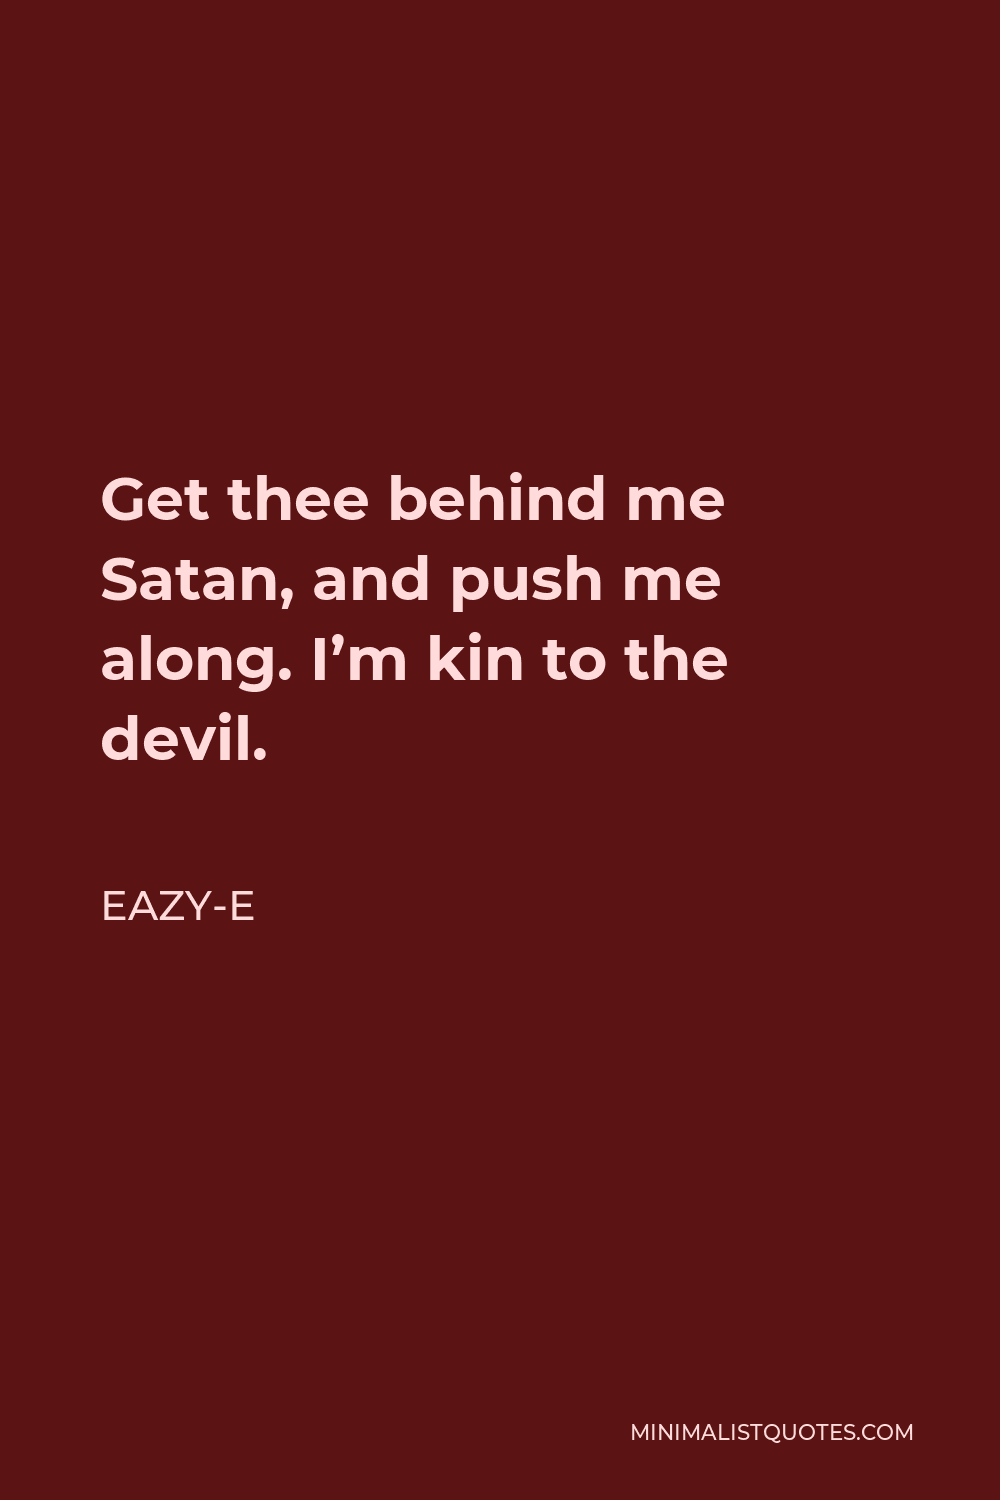 Eazy-E Quote - Get thee behind me Satan, and push me along. I’m kin to the devil.